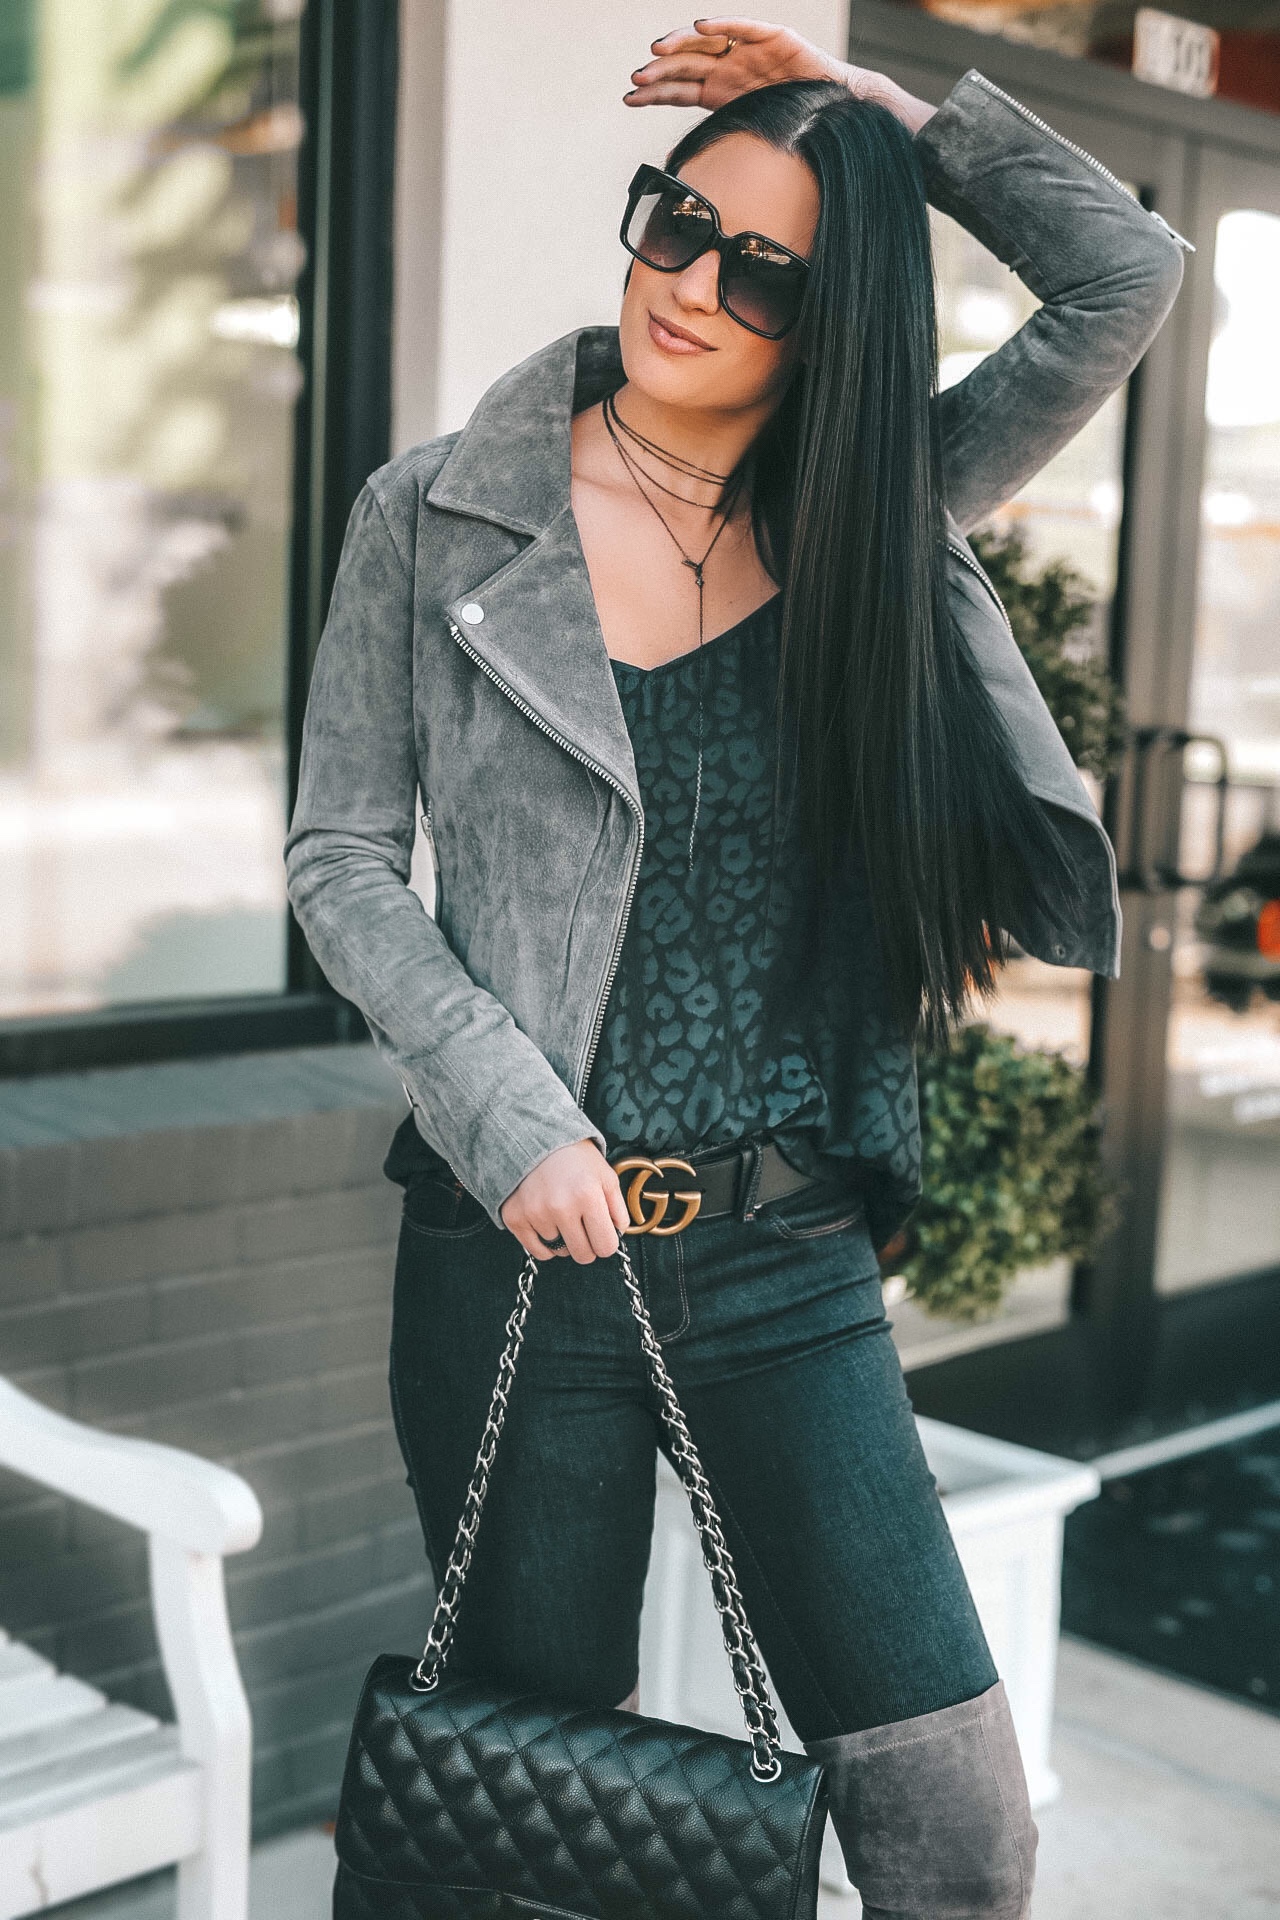 DTKAustin is sharing affordable designer jewelry holiday gift ideas from Armenta. Handbag is a Black caviar Chanel Jumbo, BlankNYC Moto Jacket, Suede OTK Boots from Goodnight Macaroon || Dressed to Kill #armenta #designerjewelry #suedeboots #motojacket #dtkaustin